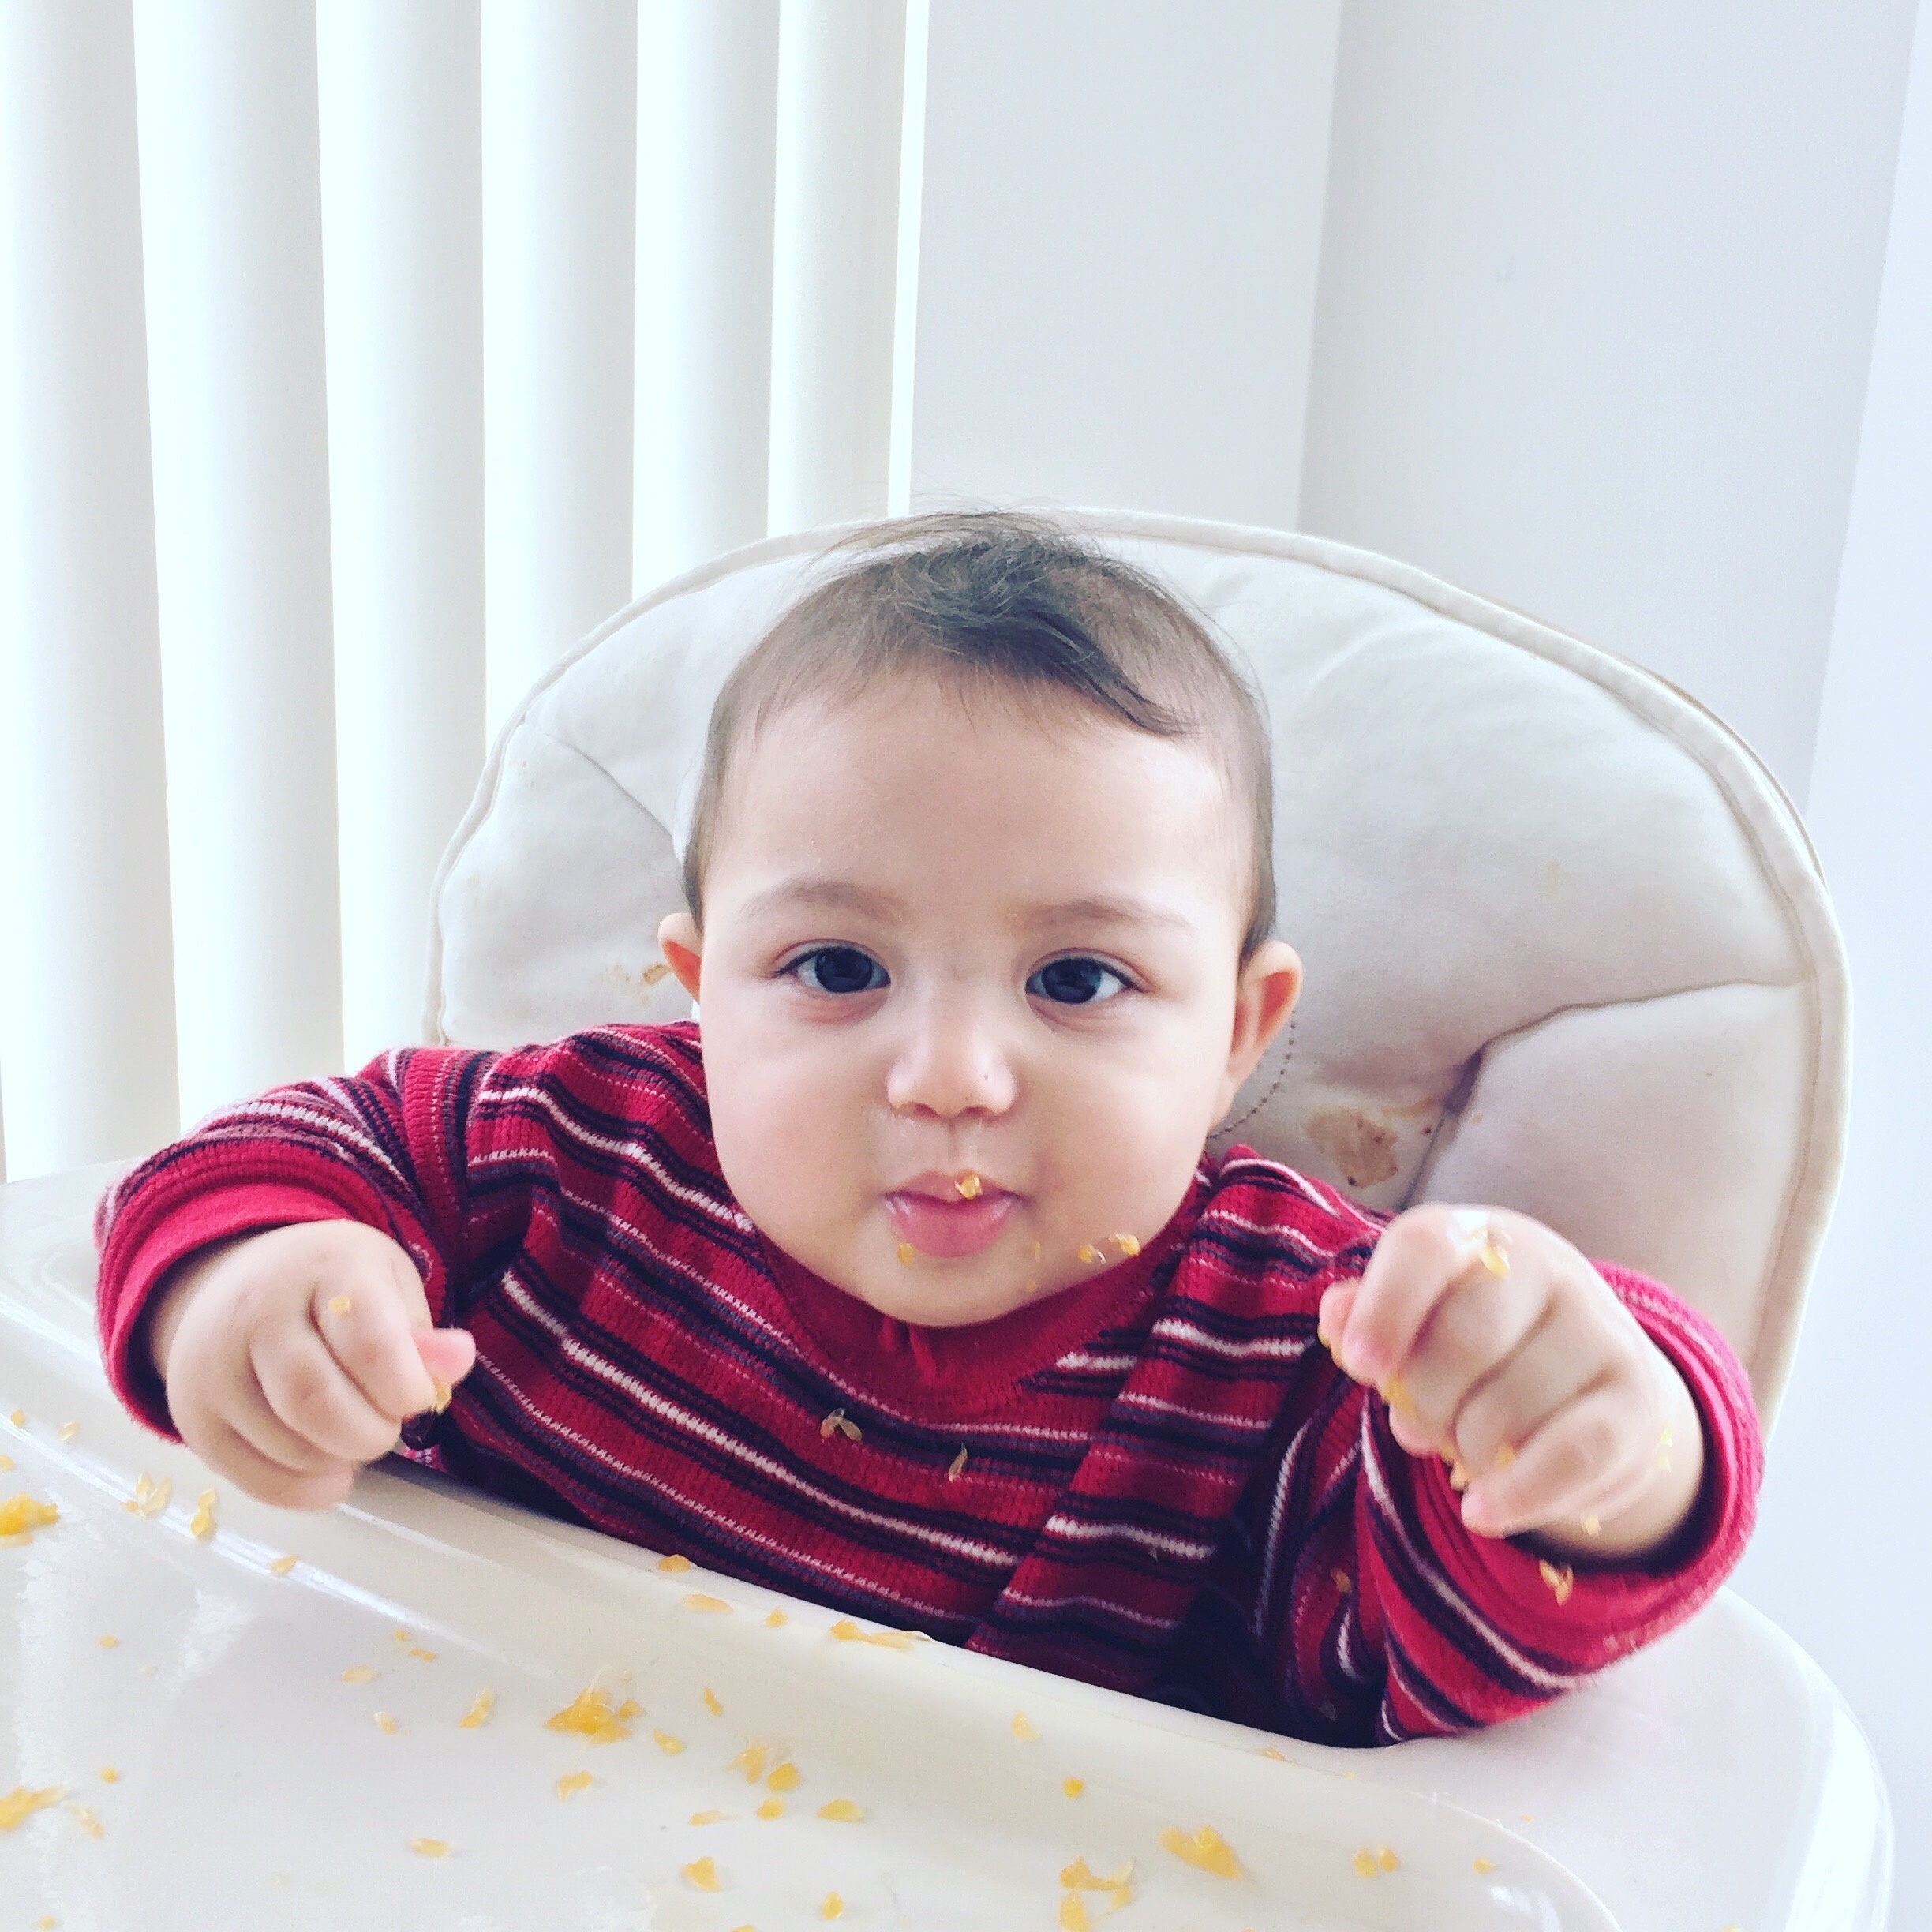 https://www.mother.ly/wp-content/uploads/2018/10/first-foods-for-baby-led-weaning-featured.jpg